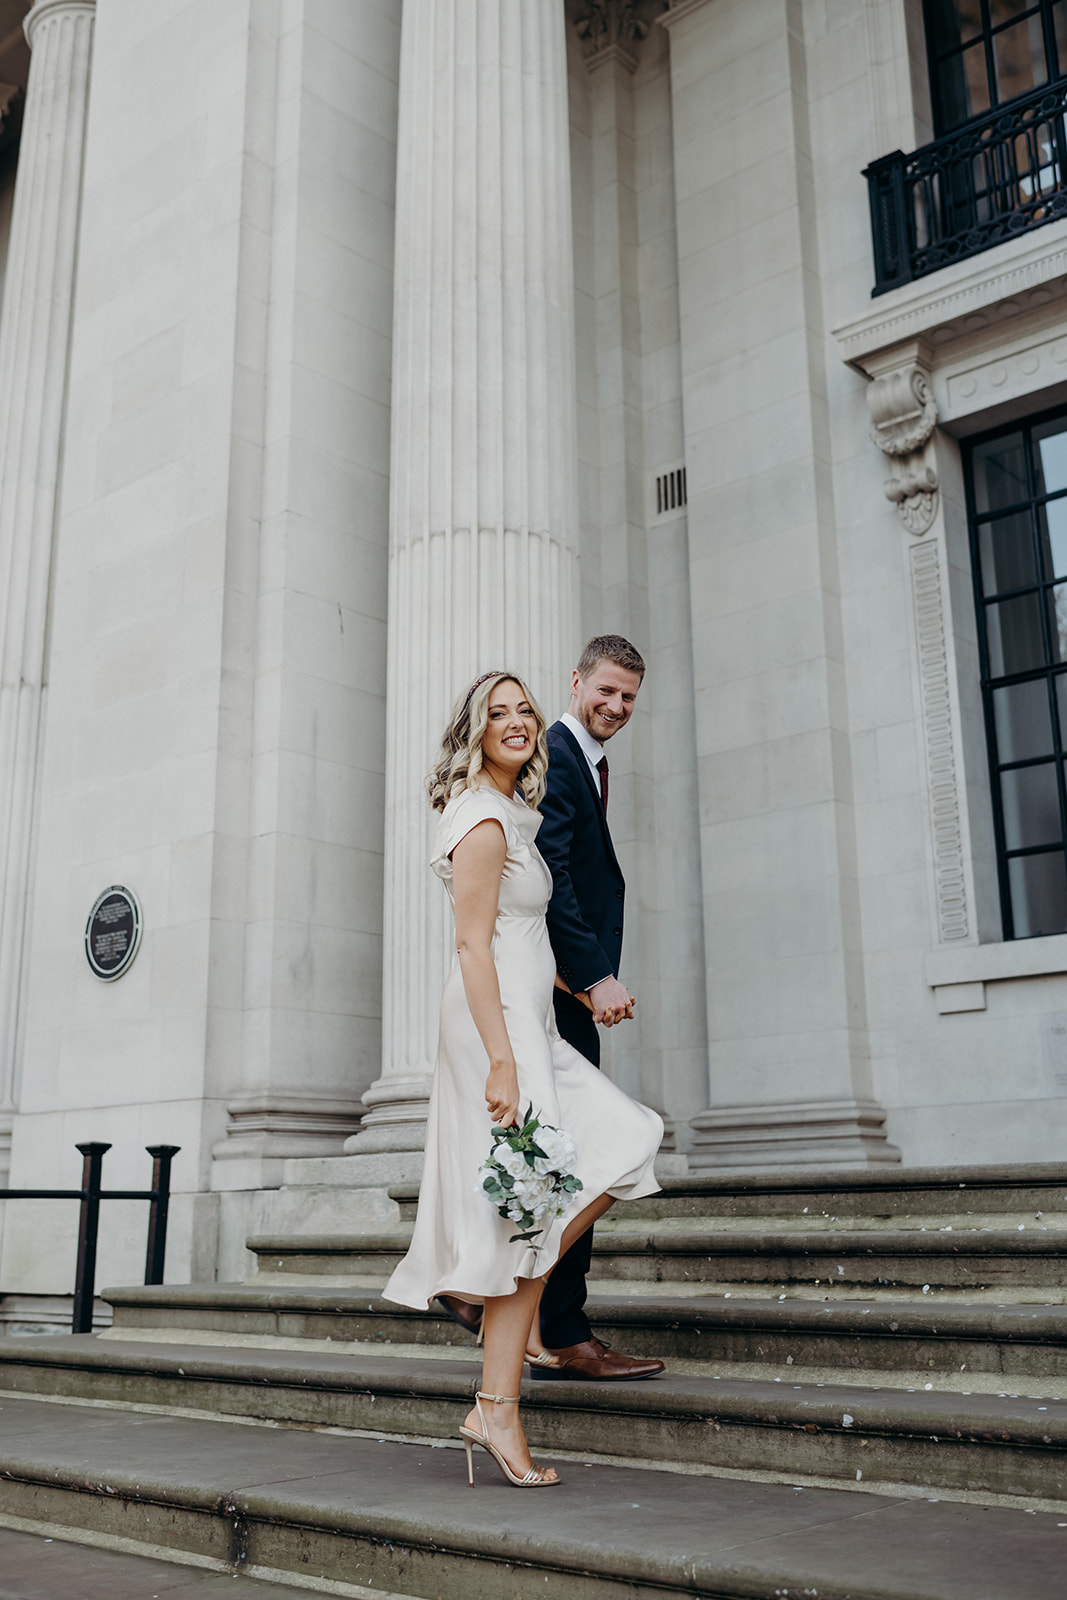 Couples wedding portraits on the steps at Old Marylebone Town Hall